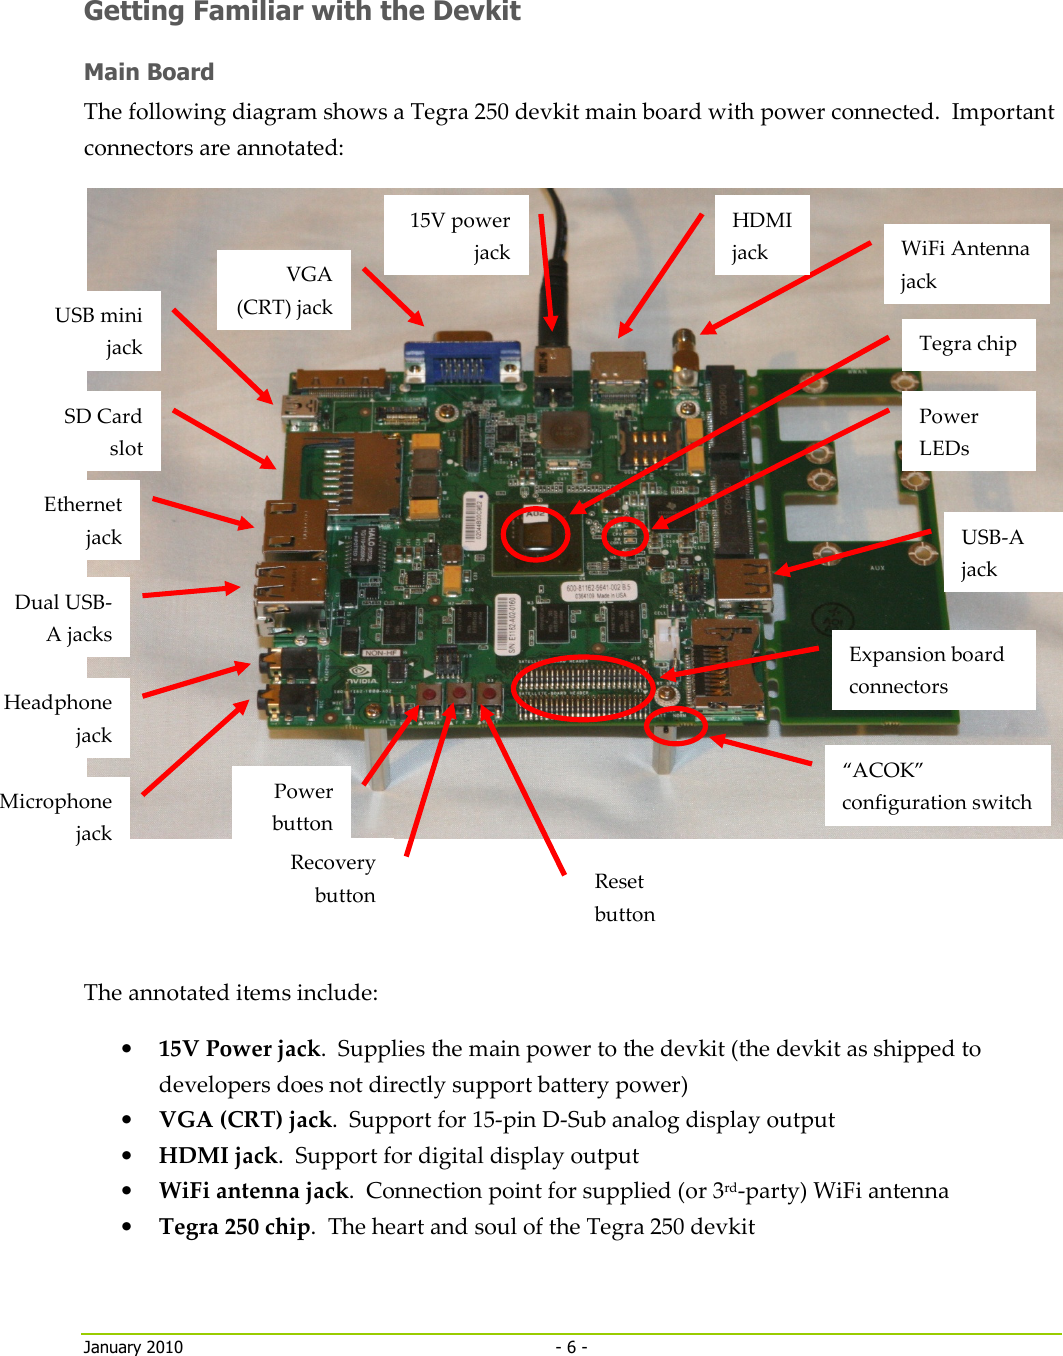     January 2010  - 6 -   Getting Familiar with the Devkit Main Board The following diagram shows a Tegra 250 devkit main board with power connected.  Important connectors are annotated:    The annotated items include: • 15V Power jack.  Supplies the main power to the devkit (the devkit as shipped to developers does not directly support battery power) • VGA (CRT) jack.  Support for 15-pin D-Sub analog display output • HDMI jack.  Support for digital display output • WiFi antenna jack.  Connection point for supplied (or 3rd-party) WiFi antenna • Tegra 250 chip.  The heart and soul of the Tegra 250 devkit “ACOK” configuration switch Power LEDs Tegra chip WiFi Antenna jack 15V power jack HDMI jack Expansion board connectors Reset button Recovery button Power button USB-A jack VGA (CRT) jack Microphone jack Headphone jack SD Card slot Ethernet jack Dual USB-A jacks USB mini jack 